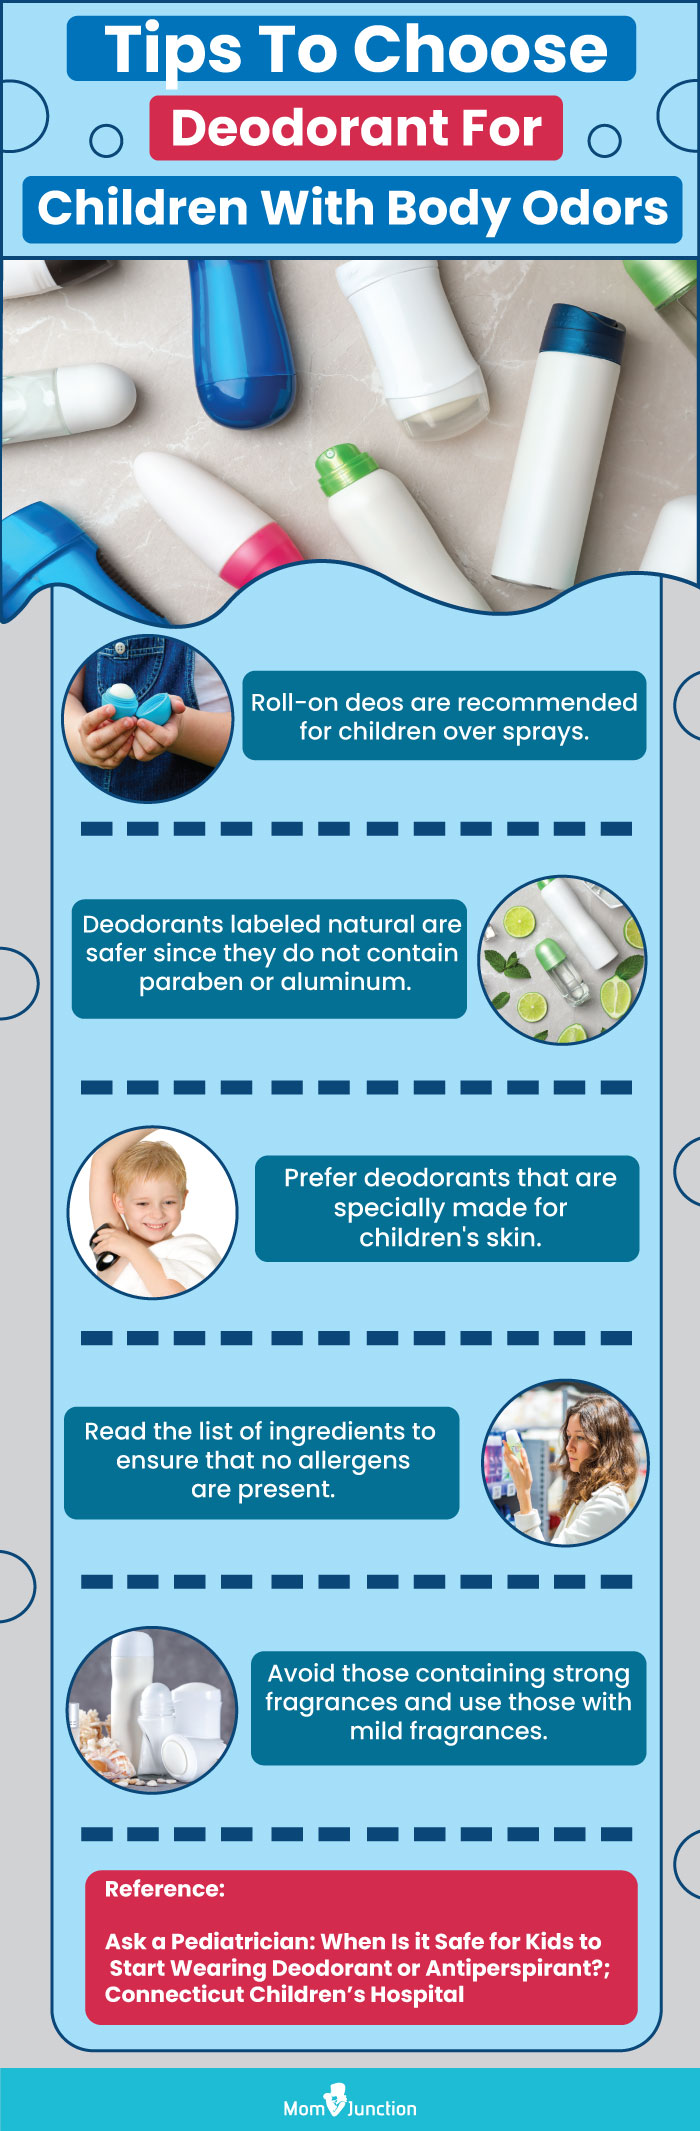 tips to choose deodorant for children with body odorsai (infographic)